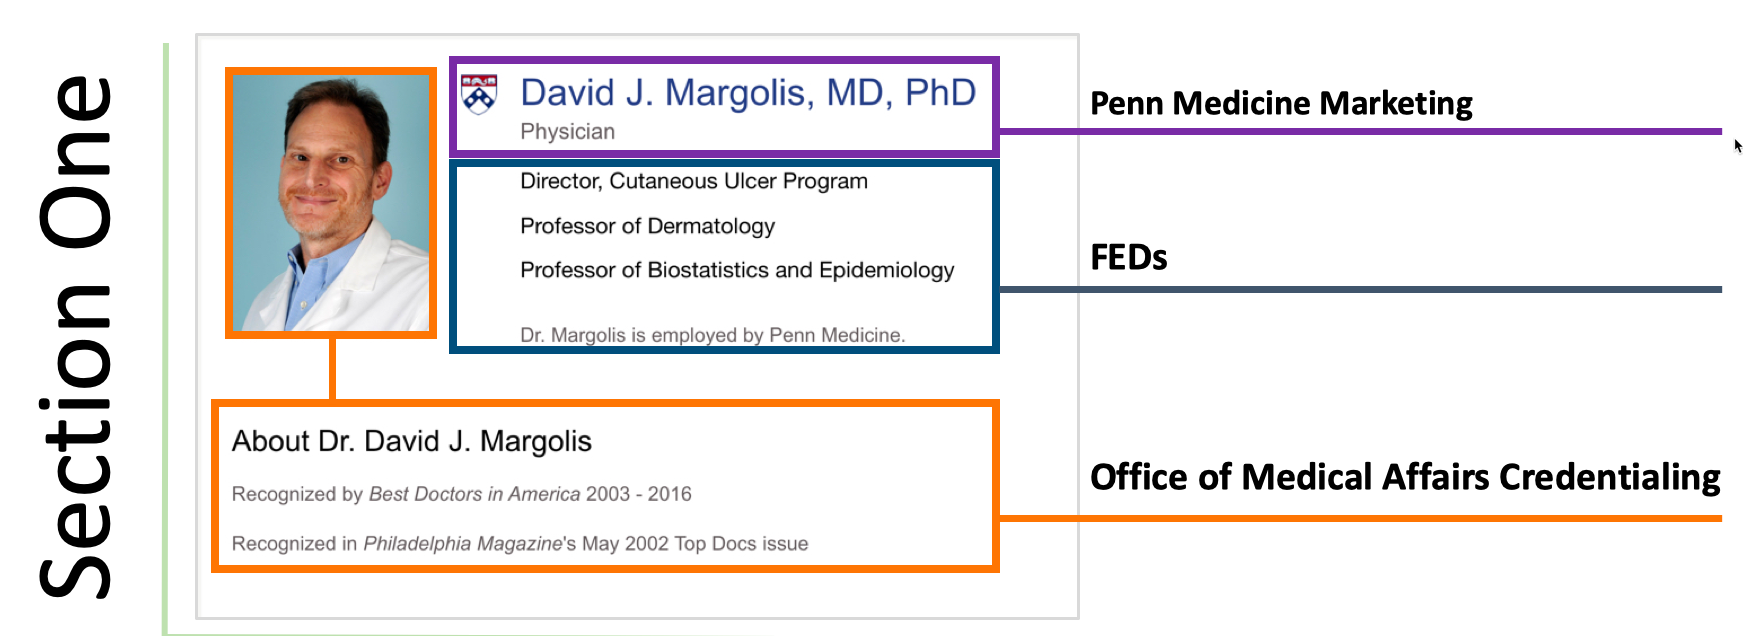 diagram of section one, Penn Medicine Marketing, FEDs and Office of Medical Affairs Credentialing